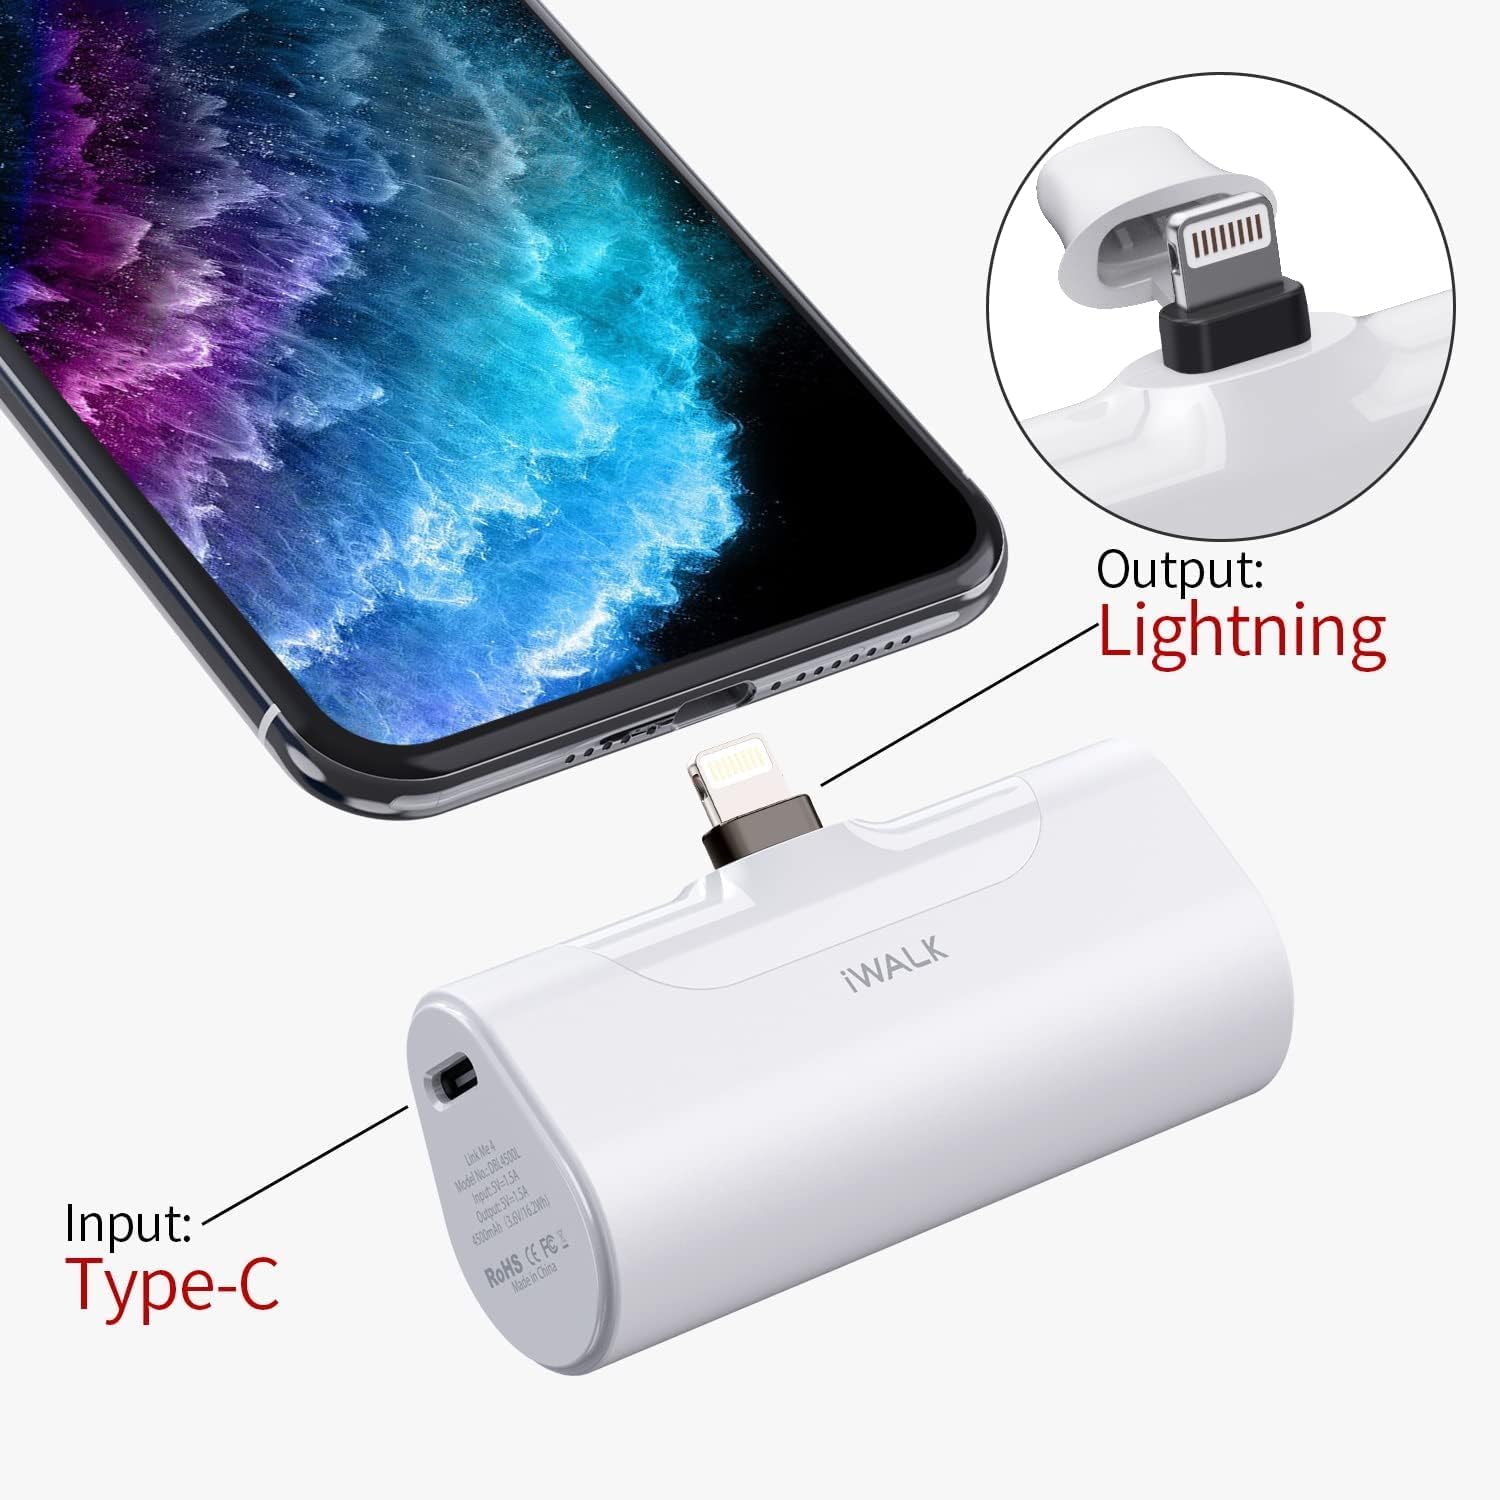 Small Portable Capsule Power Bank Charger 4500mAh Ultra-Compact Power Bank Compatible with iPhone 13/13 Pro Max/12/12 Mini/12 Pro Max/11 Pro/XS Max/XR/X/8/7/6/Plus Airpods and More (White)